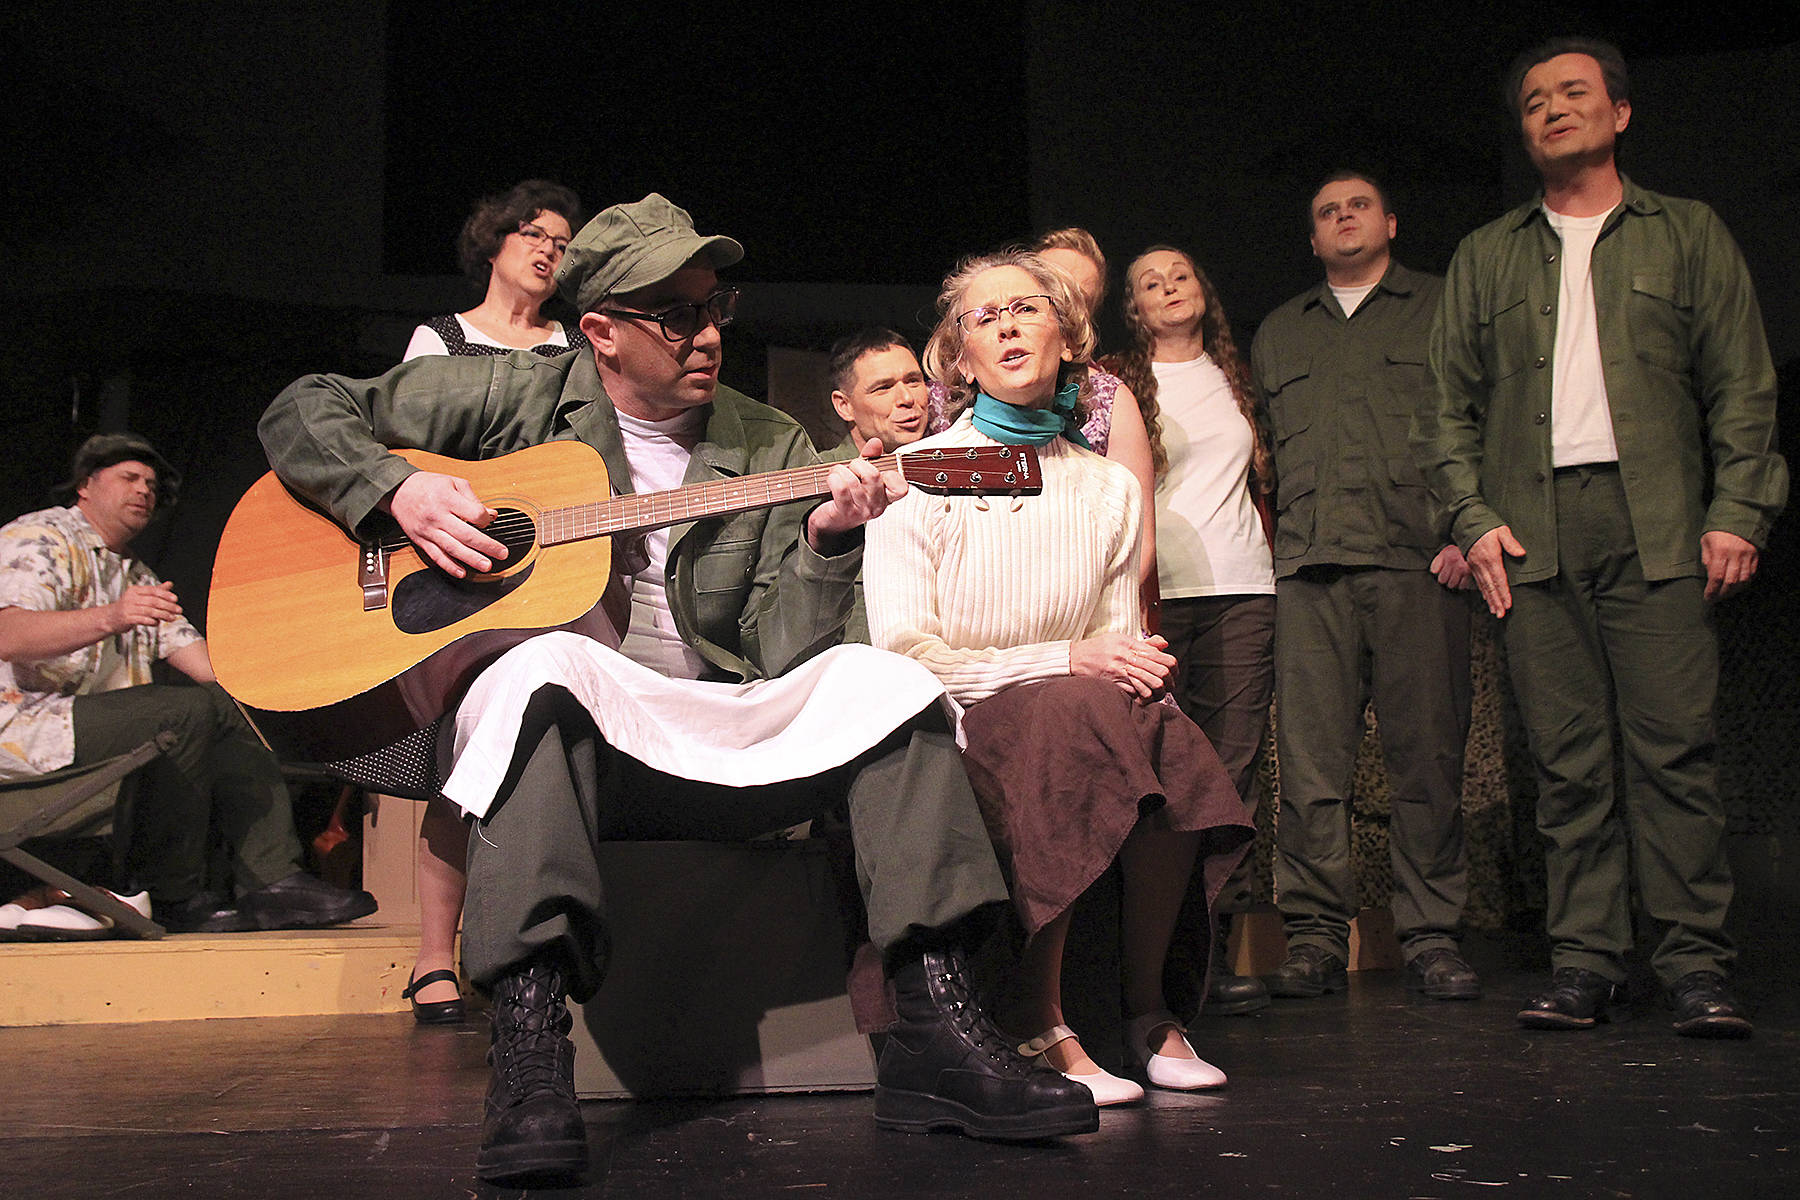 Pvt. Lopez and Lt. Louise Kimble, played by Jason Herken and Vicky Canales Riemer, perform a song that will be familiar to fans of the movie or TV show M*A*S*H during Whidbey Playhouse’s production of the play.